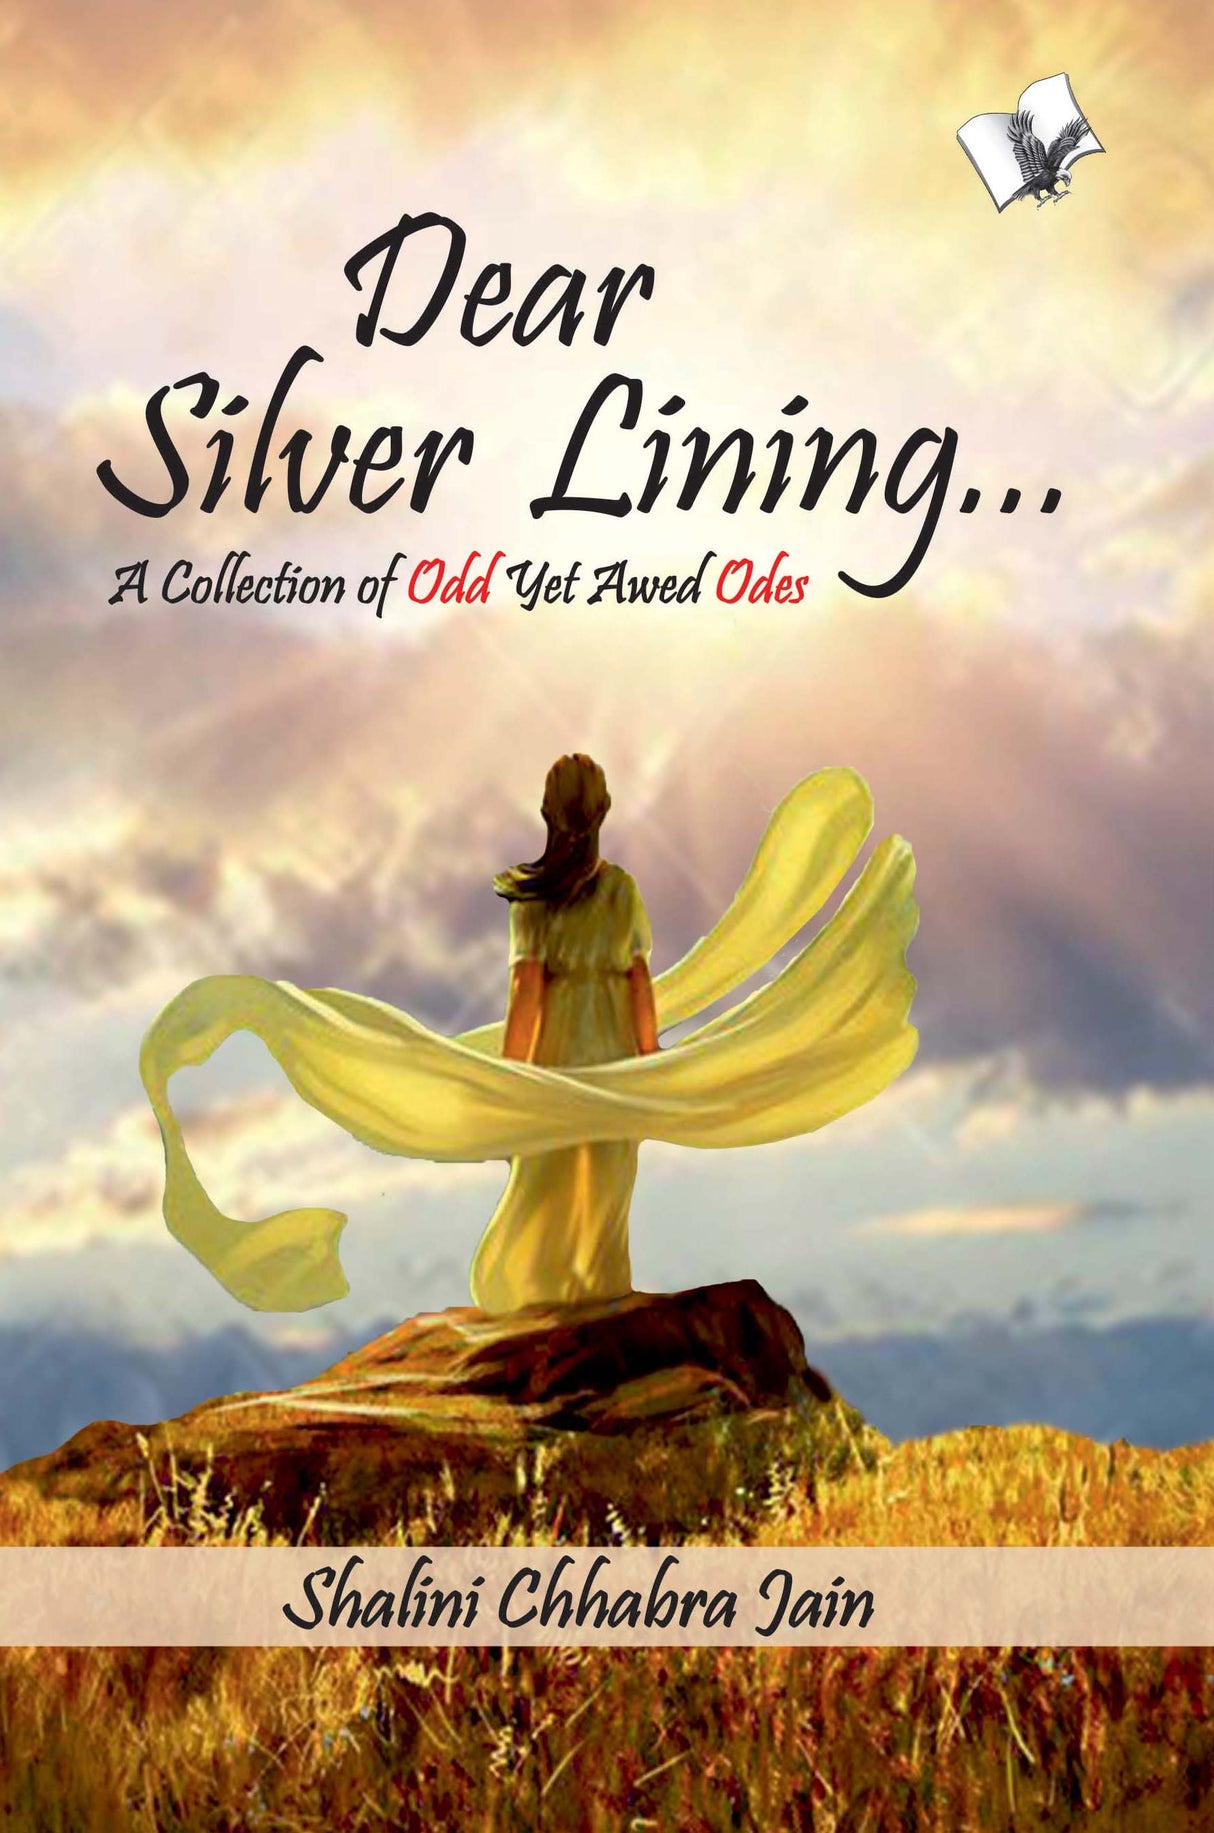 Dear Silver Lining...: A Collection of Odd Yet Awed Odes